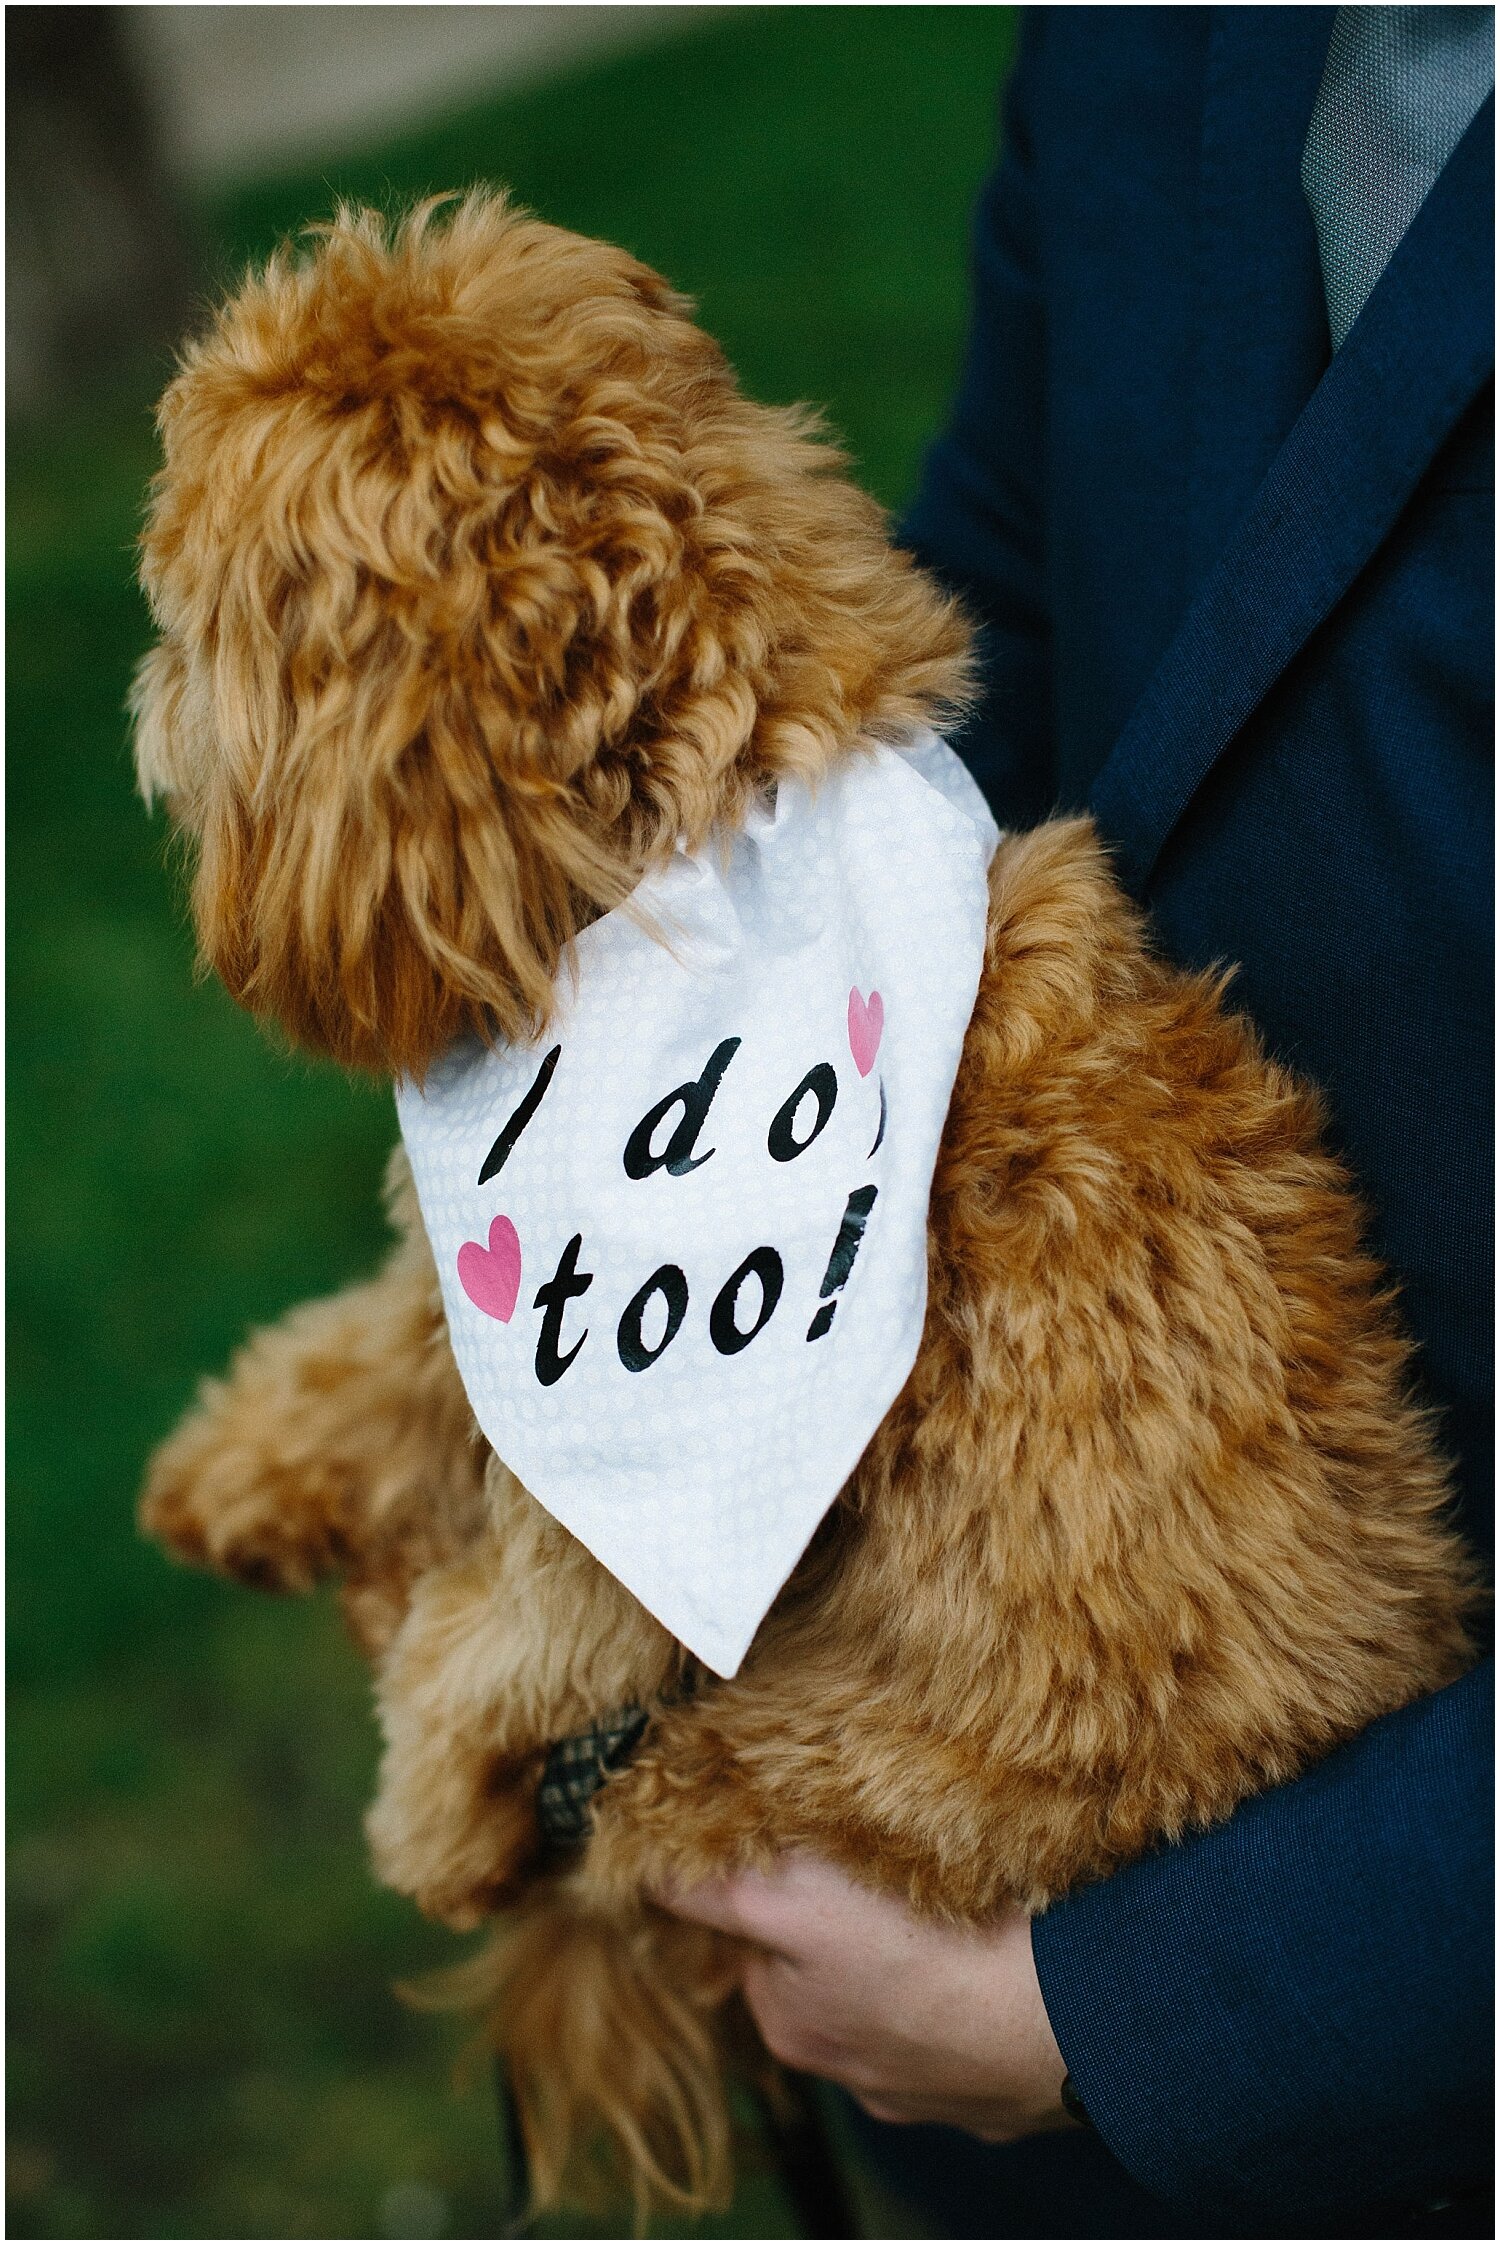  cute dog with bandana that says “ I do too!” at the wedding ceremony 